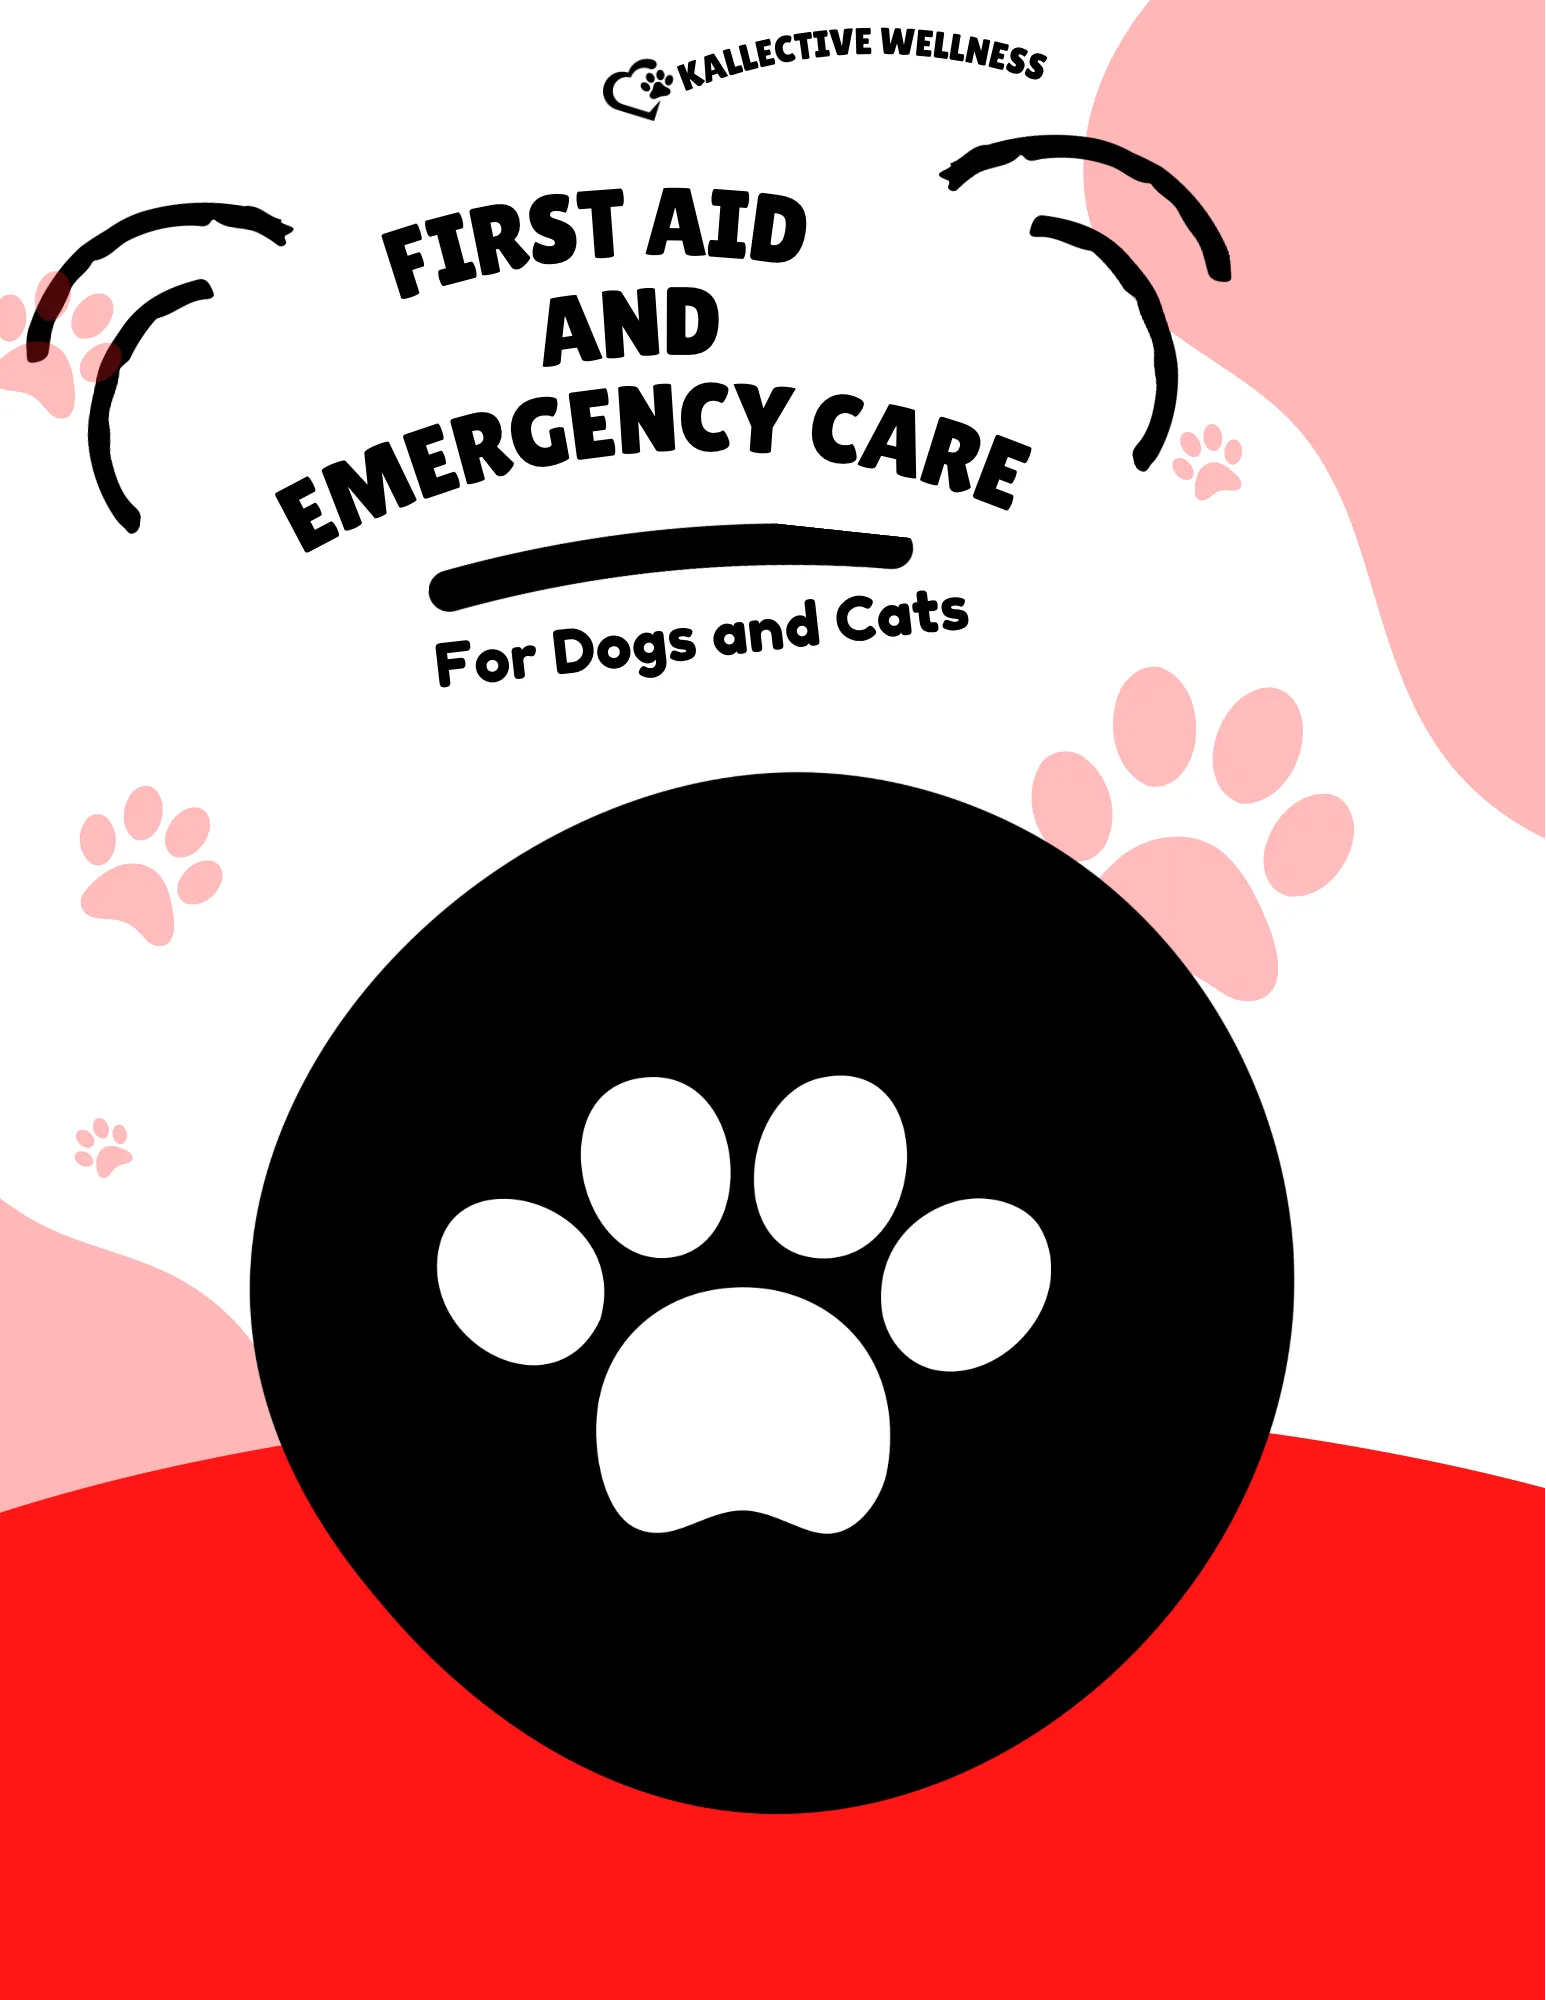 First Aid and Emergency Care for dogs and cats